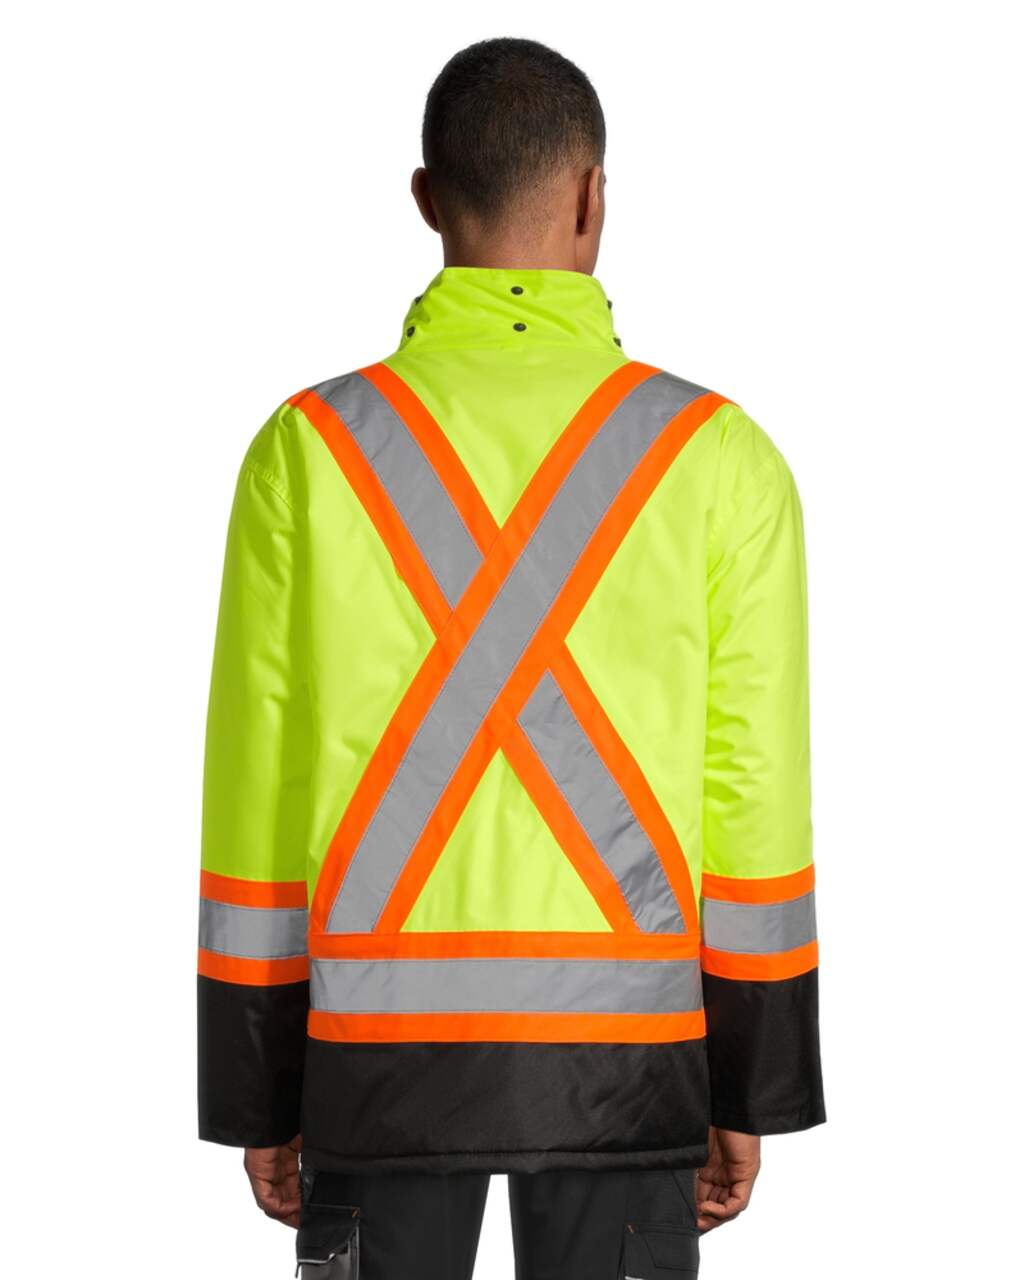 https://media-www.canadiantire.ca/product/playing/footwear-apparel/work-footwear-apparel/1872676/terra-hi-vis-lined-winter-parka-yellow-medium-3d1867c7-2eef-4d63-911f-135e074e4d97.png?imdensity=1&imwidth=1244&impolicy=mZoom